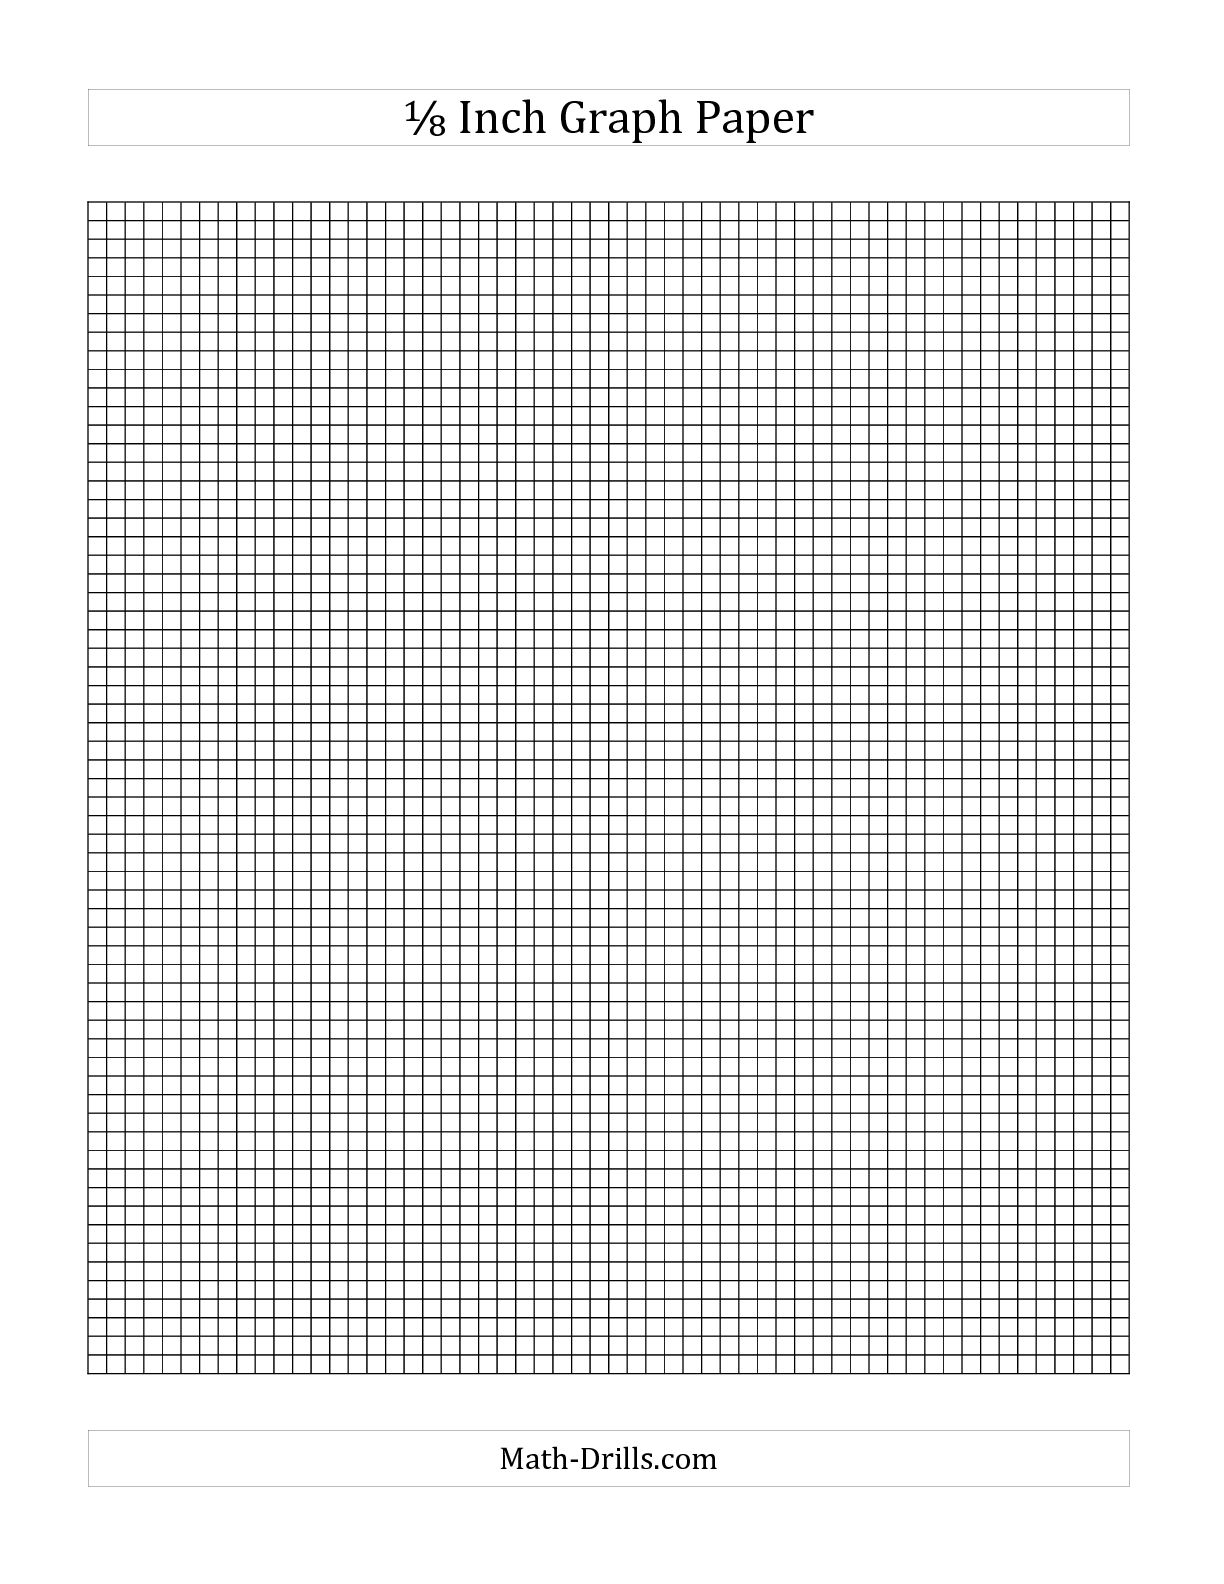 graph_paper_1_eighth_inch_all_pin